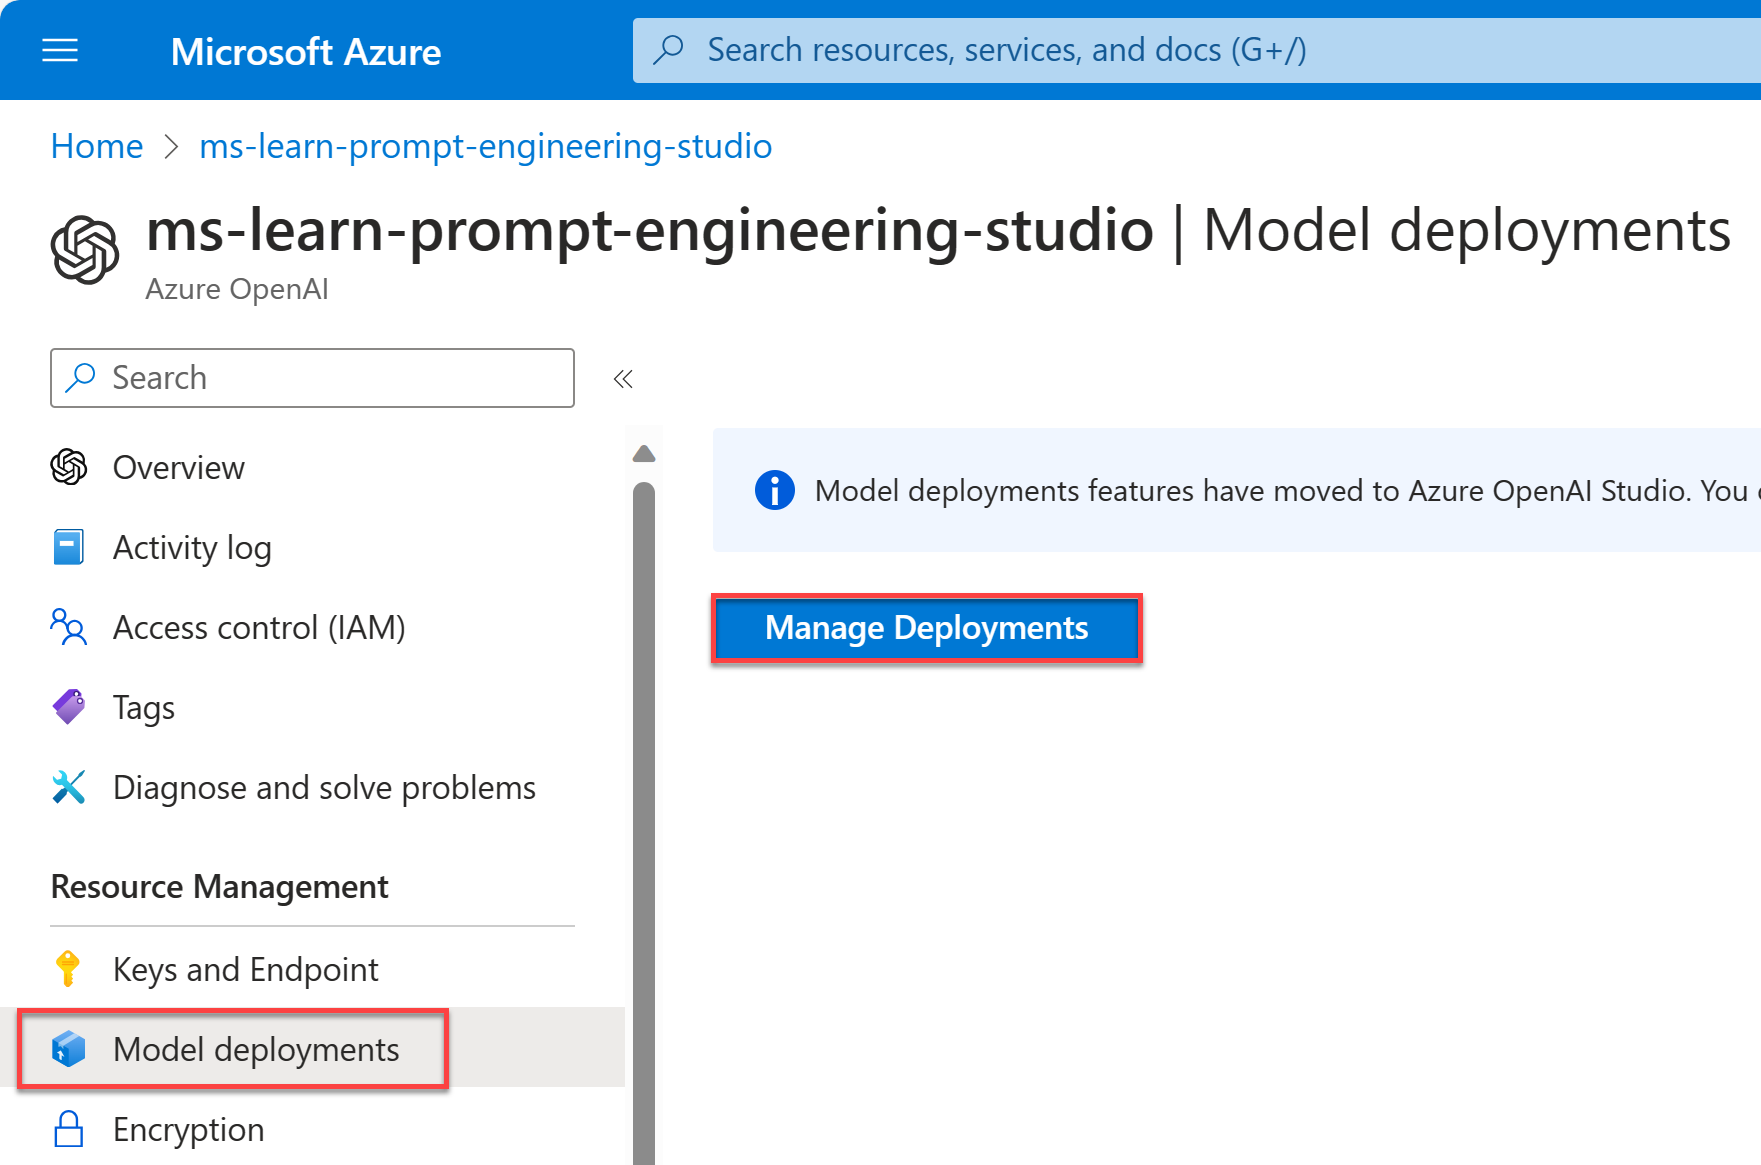 Screenshot of the Azure portal, showing the newly created OpenAI resource. The model deployments and manage deployments buttons are highlighted with red boxes.